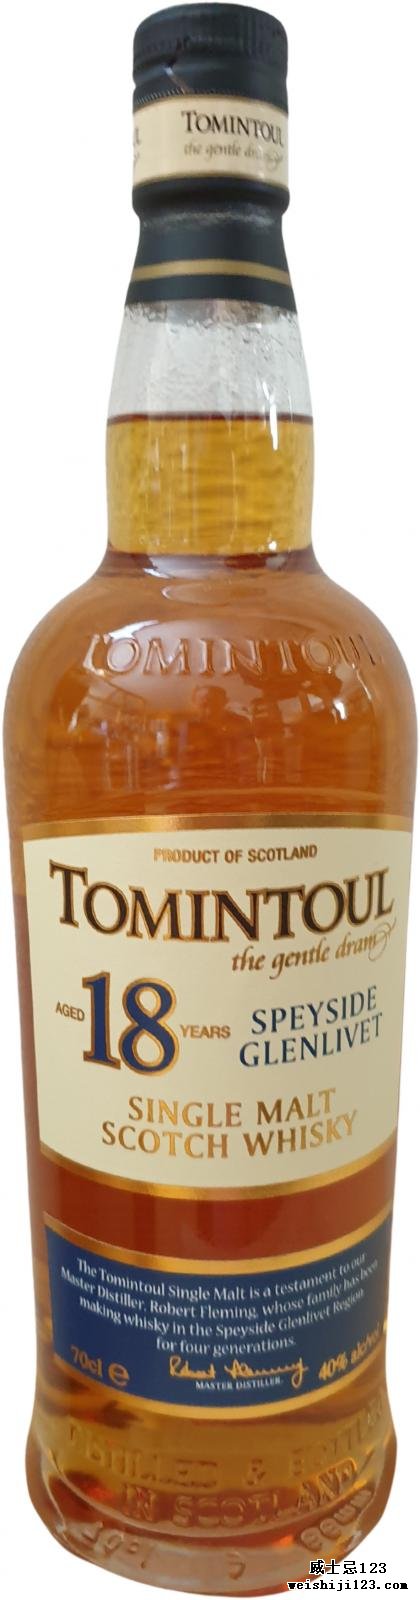 Tomintoul 18-year-old